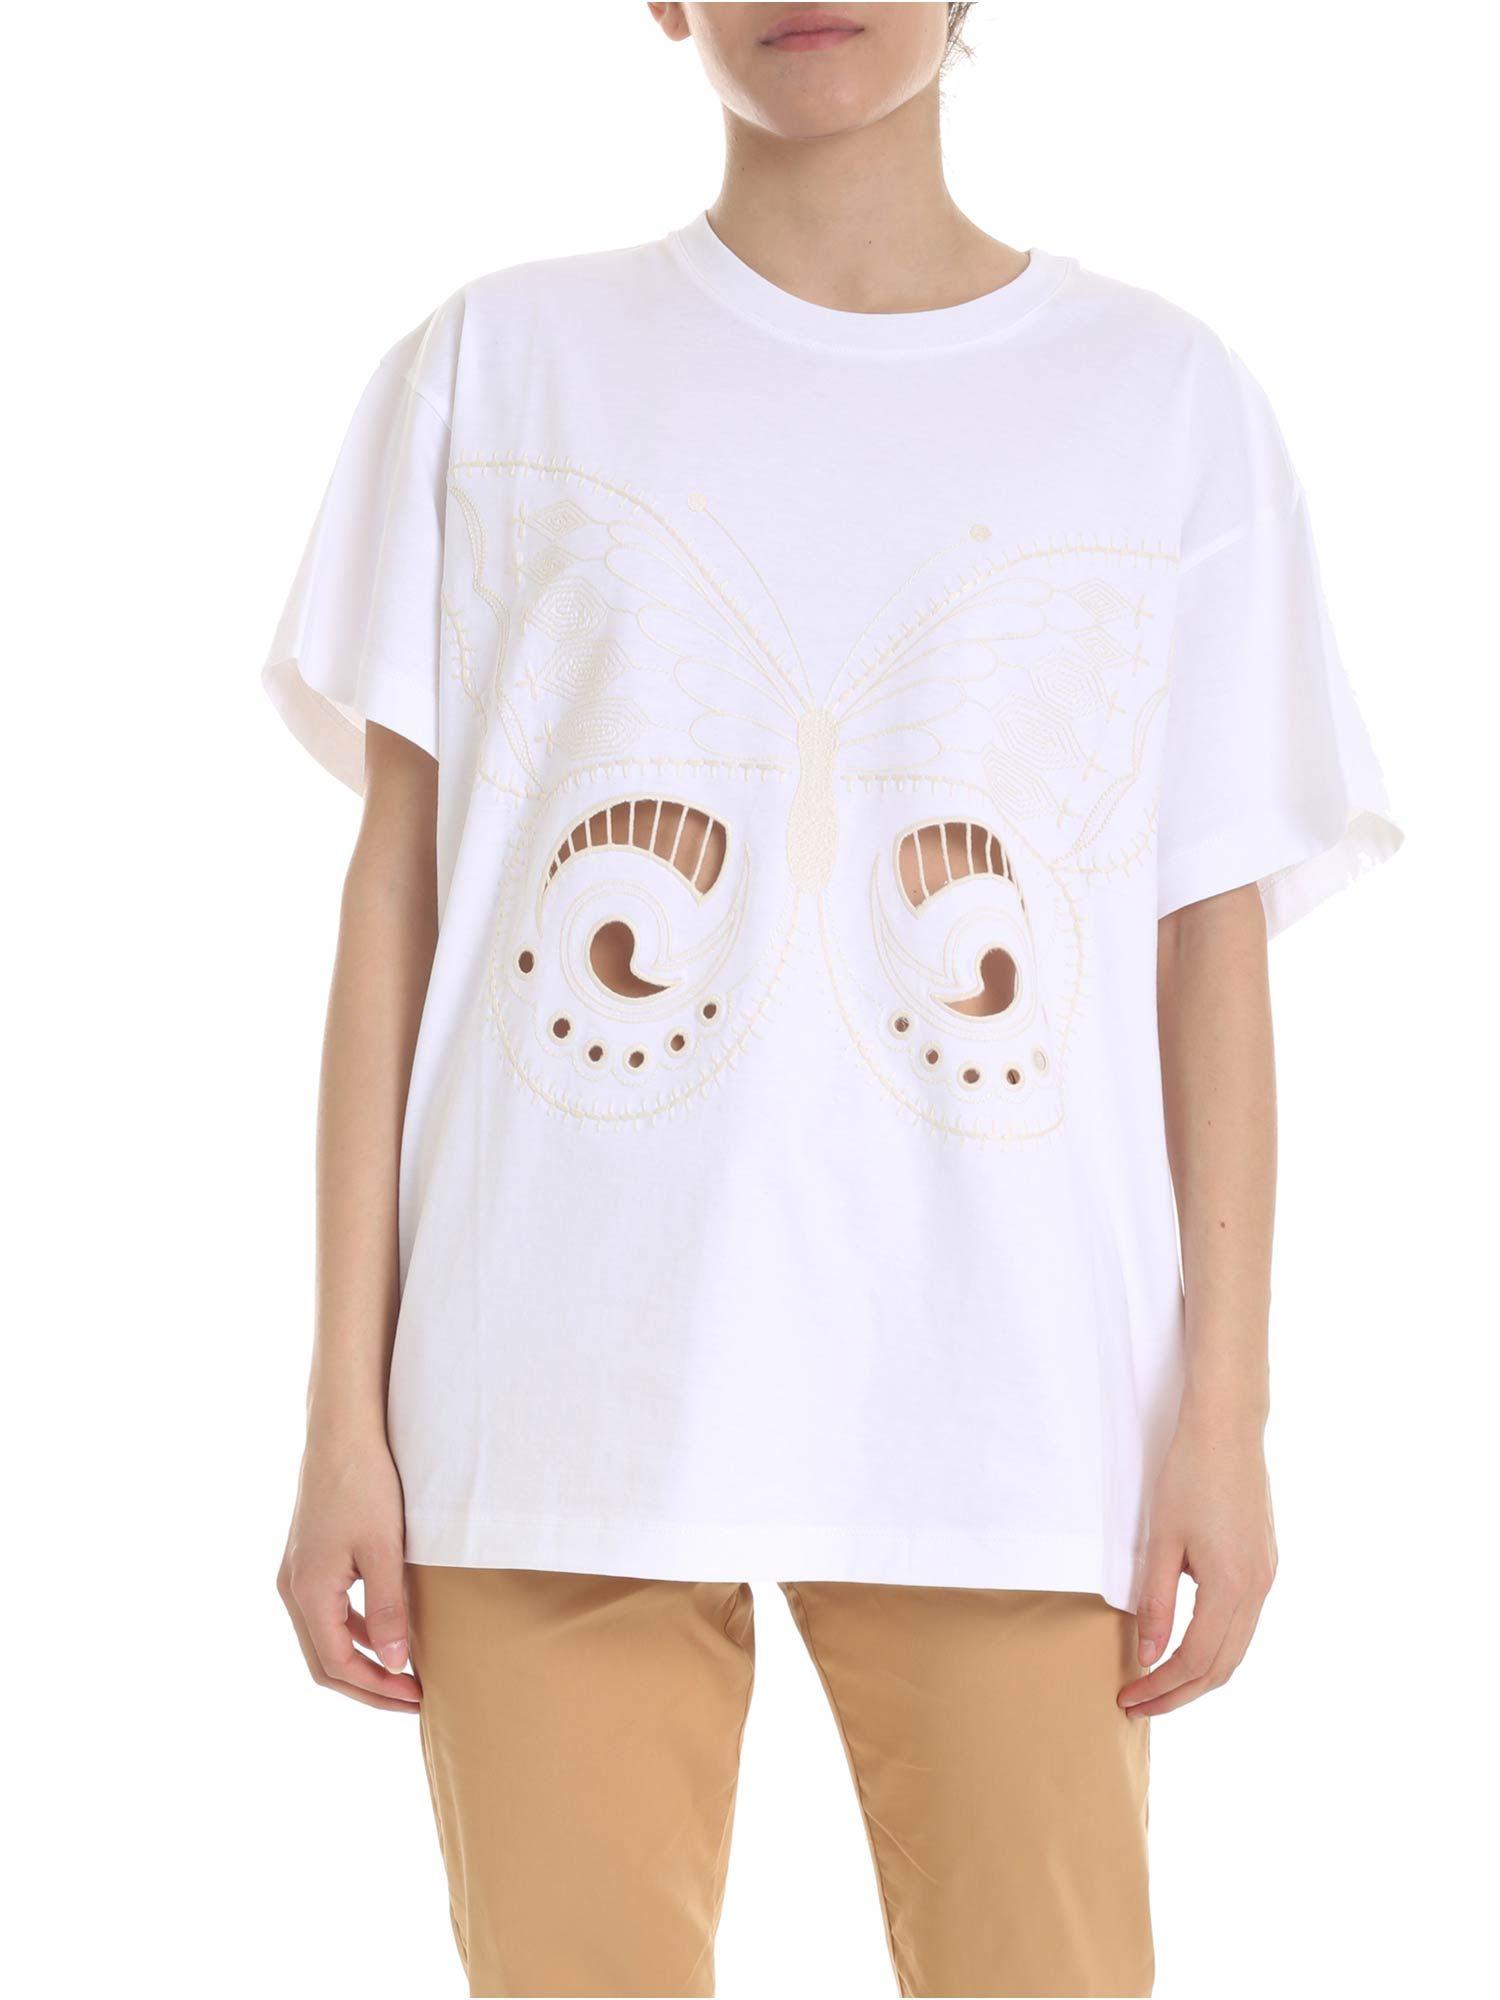 See By Chloé White T-shirt With Butterfly Embroidery in White - Lyst